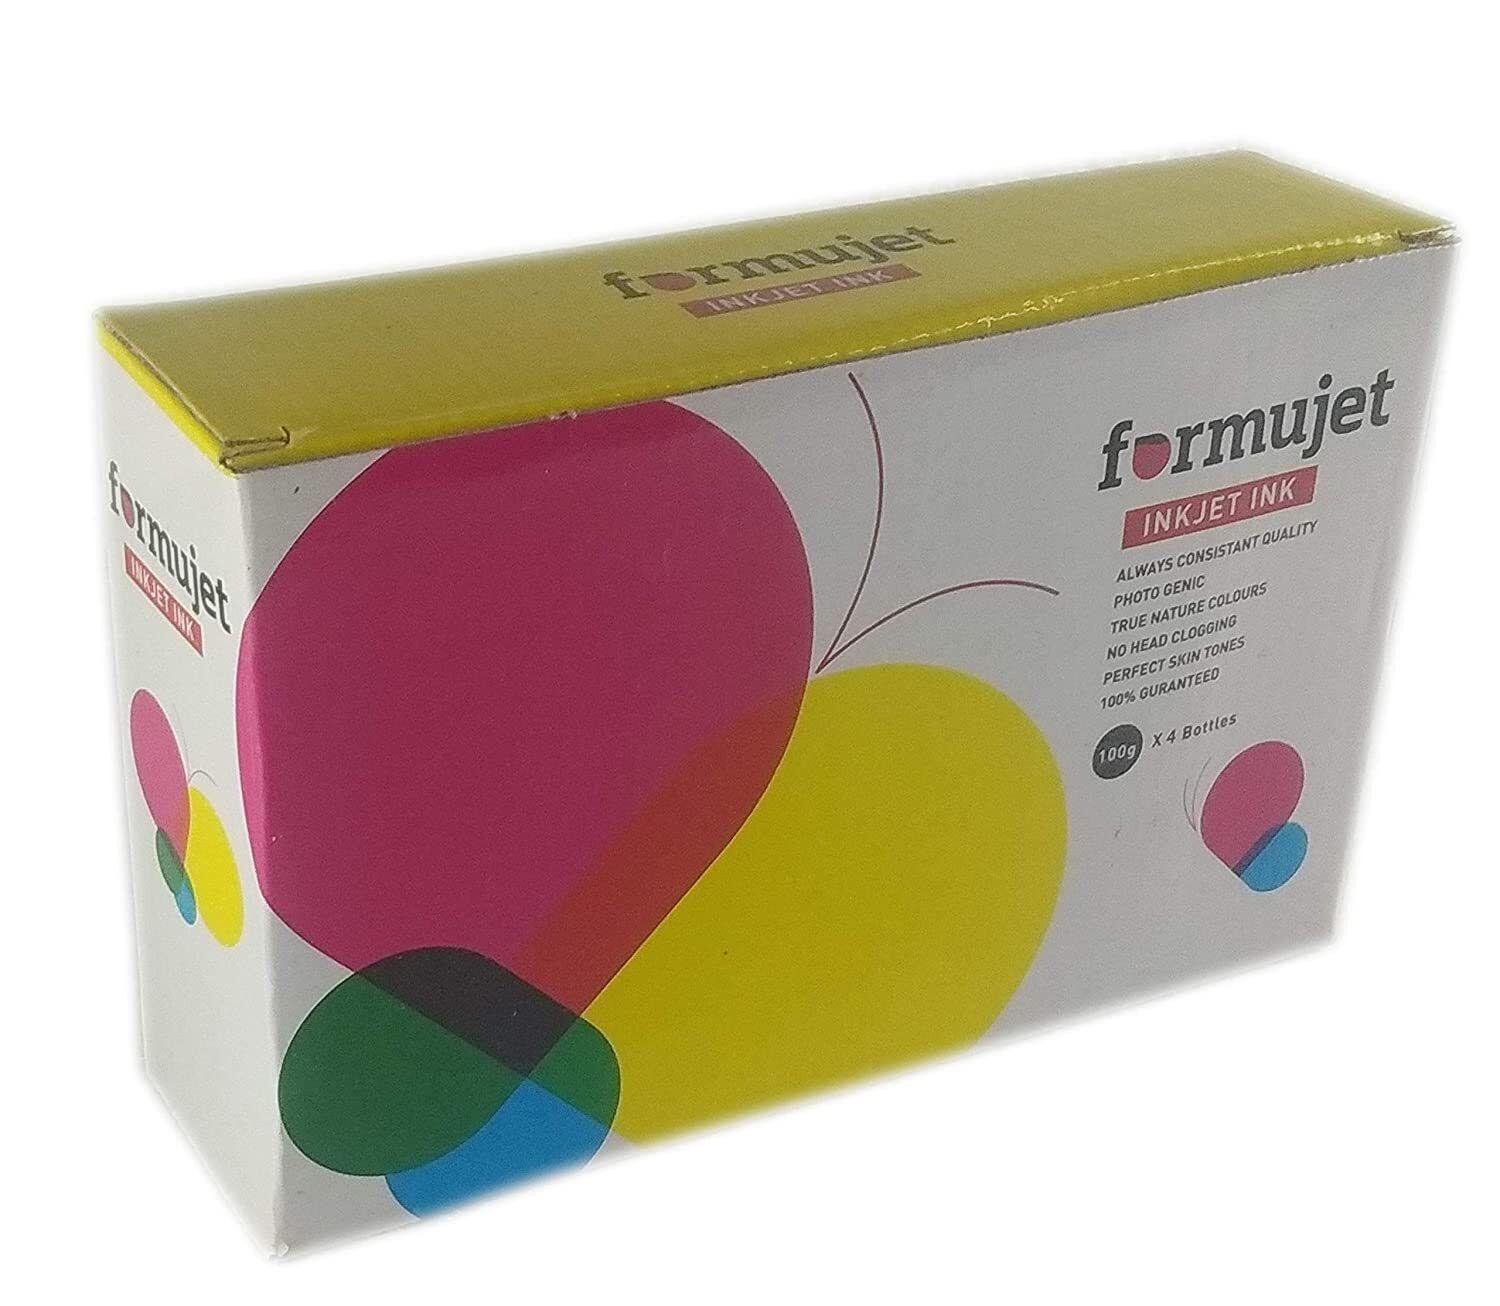 Formujet Pigment Ink Compatible For Epson IEC 67 100g4 Color